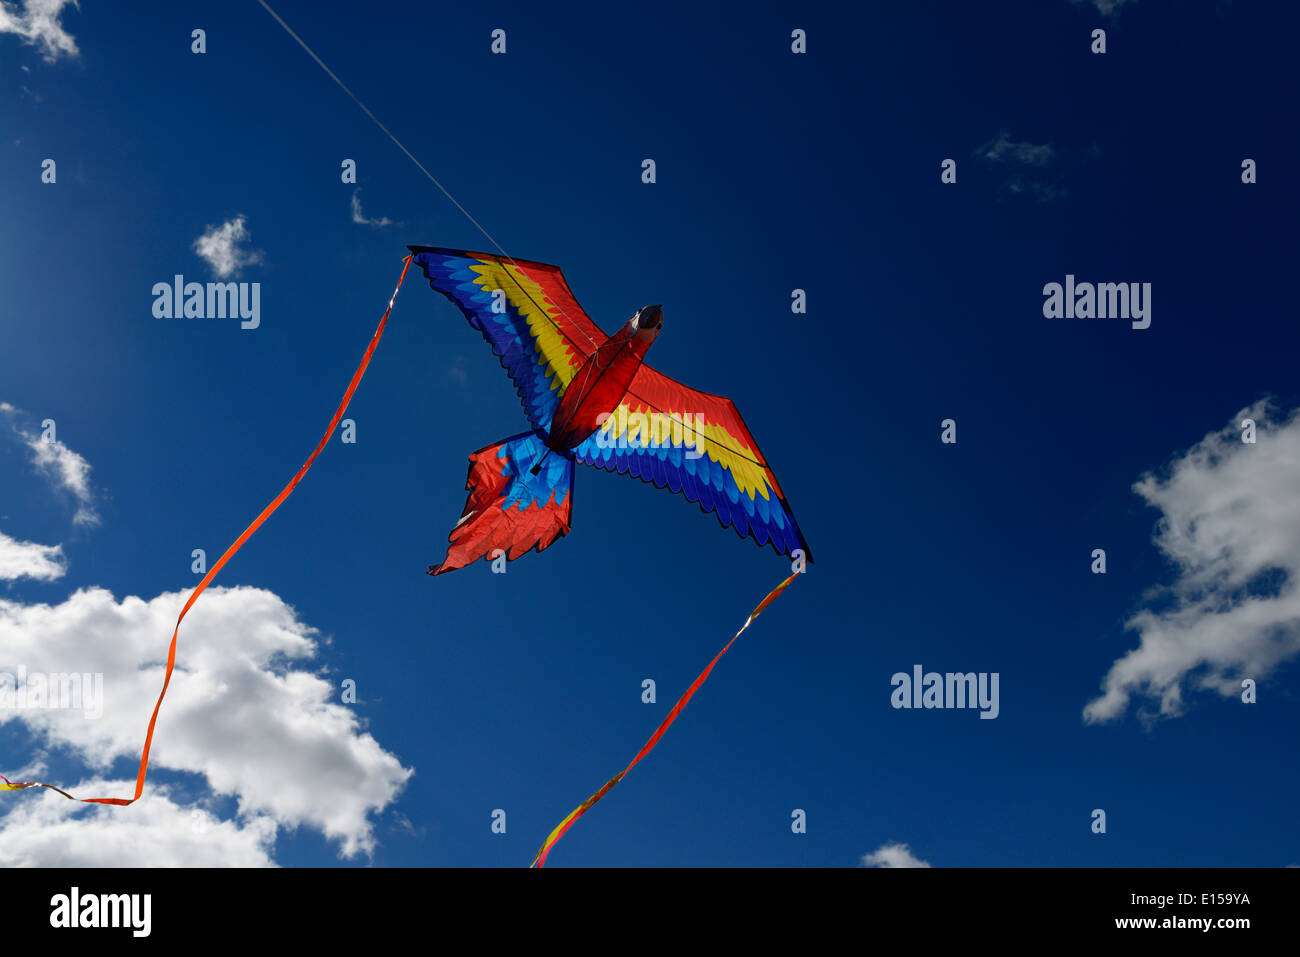 Blue and Red Macaw Parrot Kite flying high against a blue sky in a city of Toronto park Stock Photo